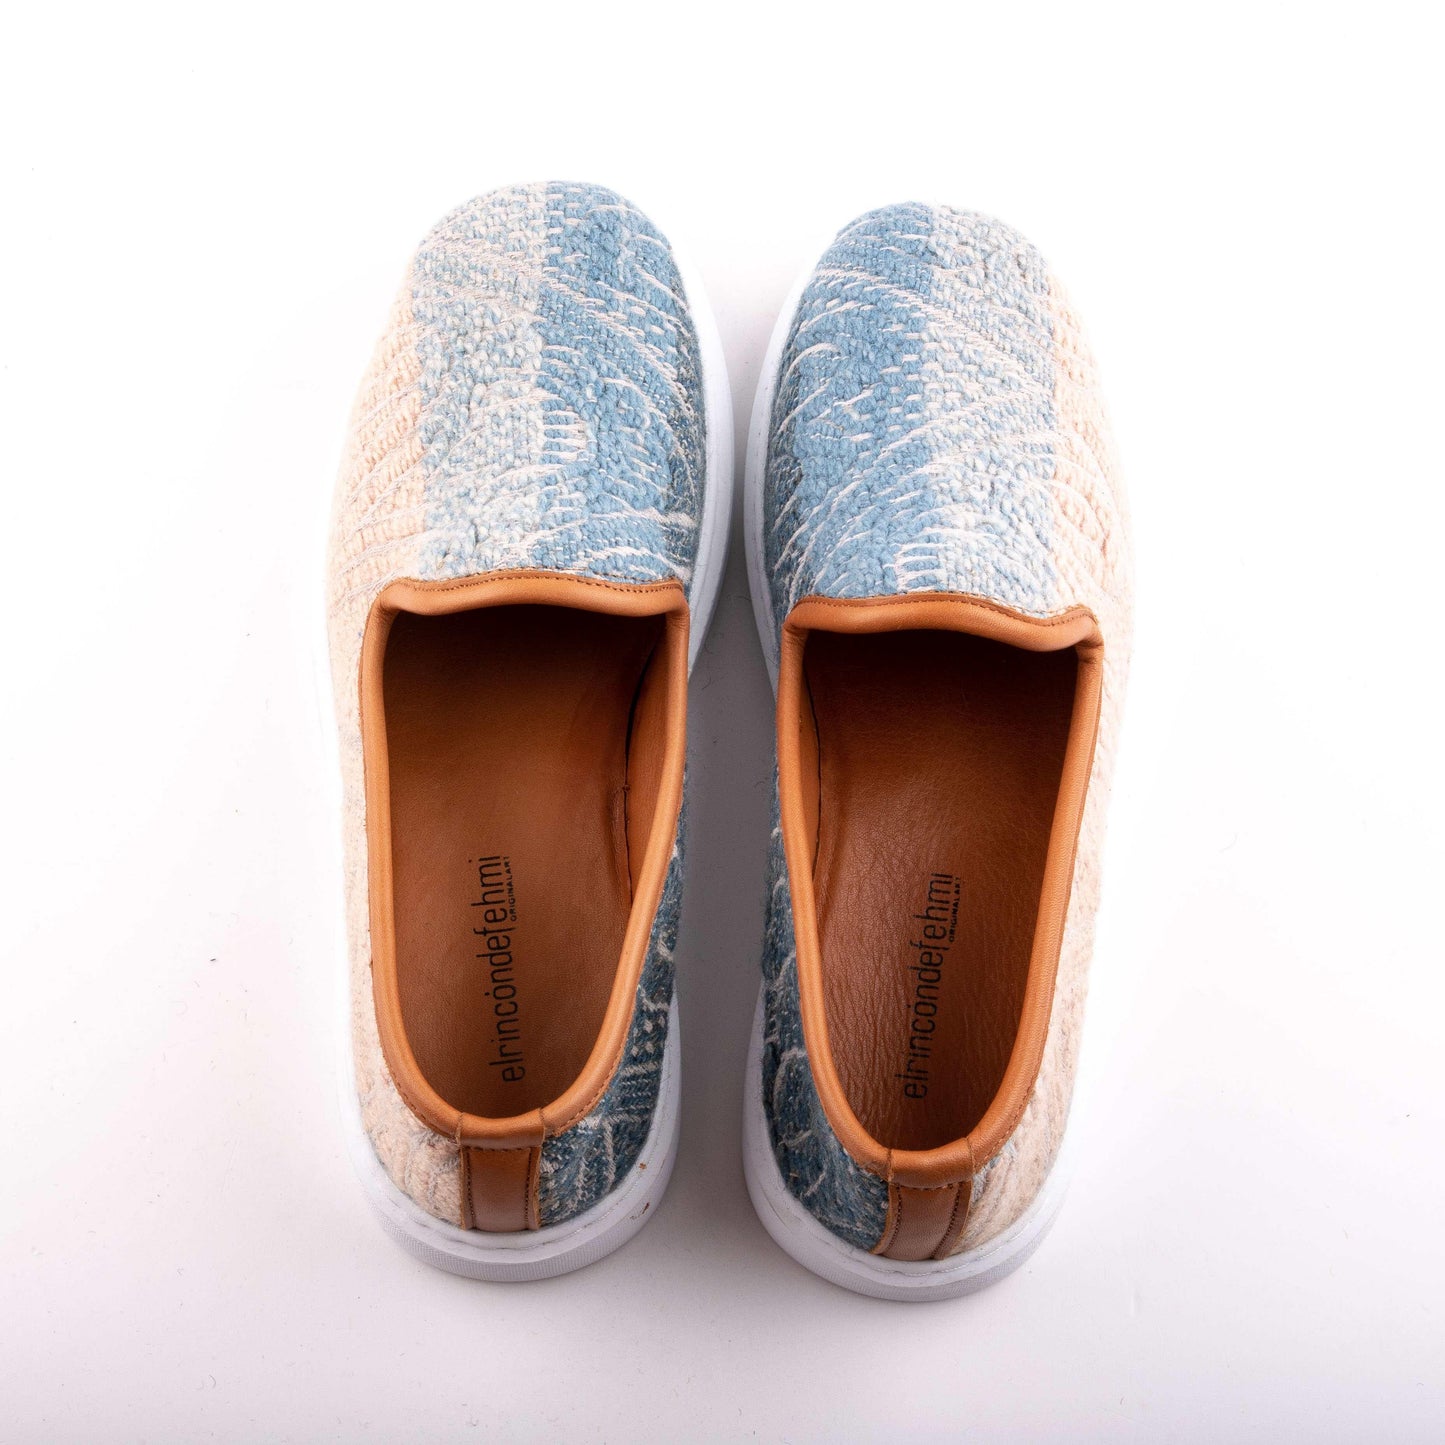 Ethnic Man Slip-On Shoes Crafted From Handmade Kilim and Real Leather Size 11.5 Base Width: 10,5 cm - Base Length: 31,5 cm